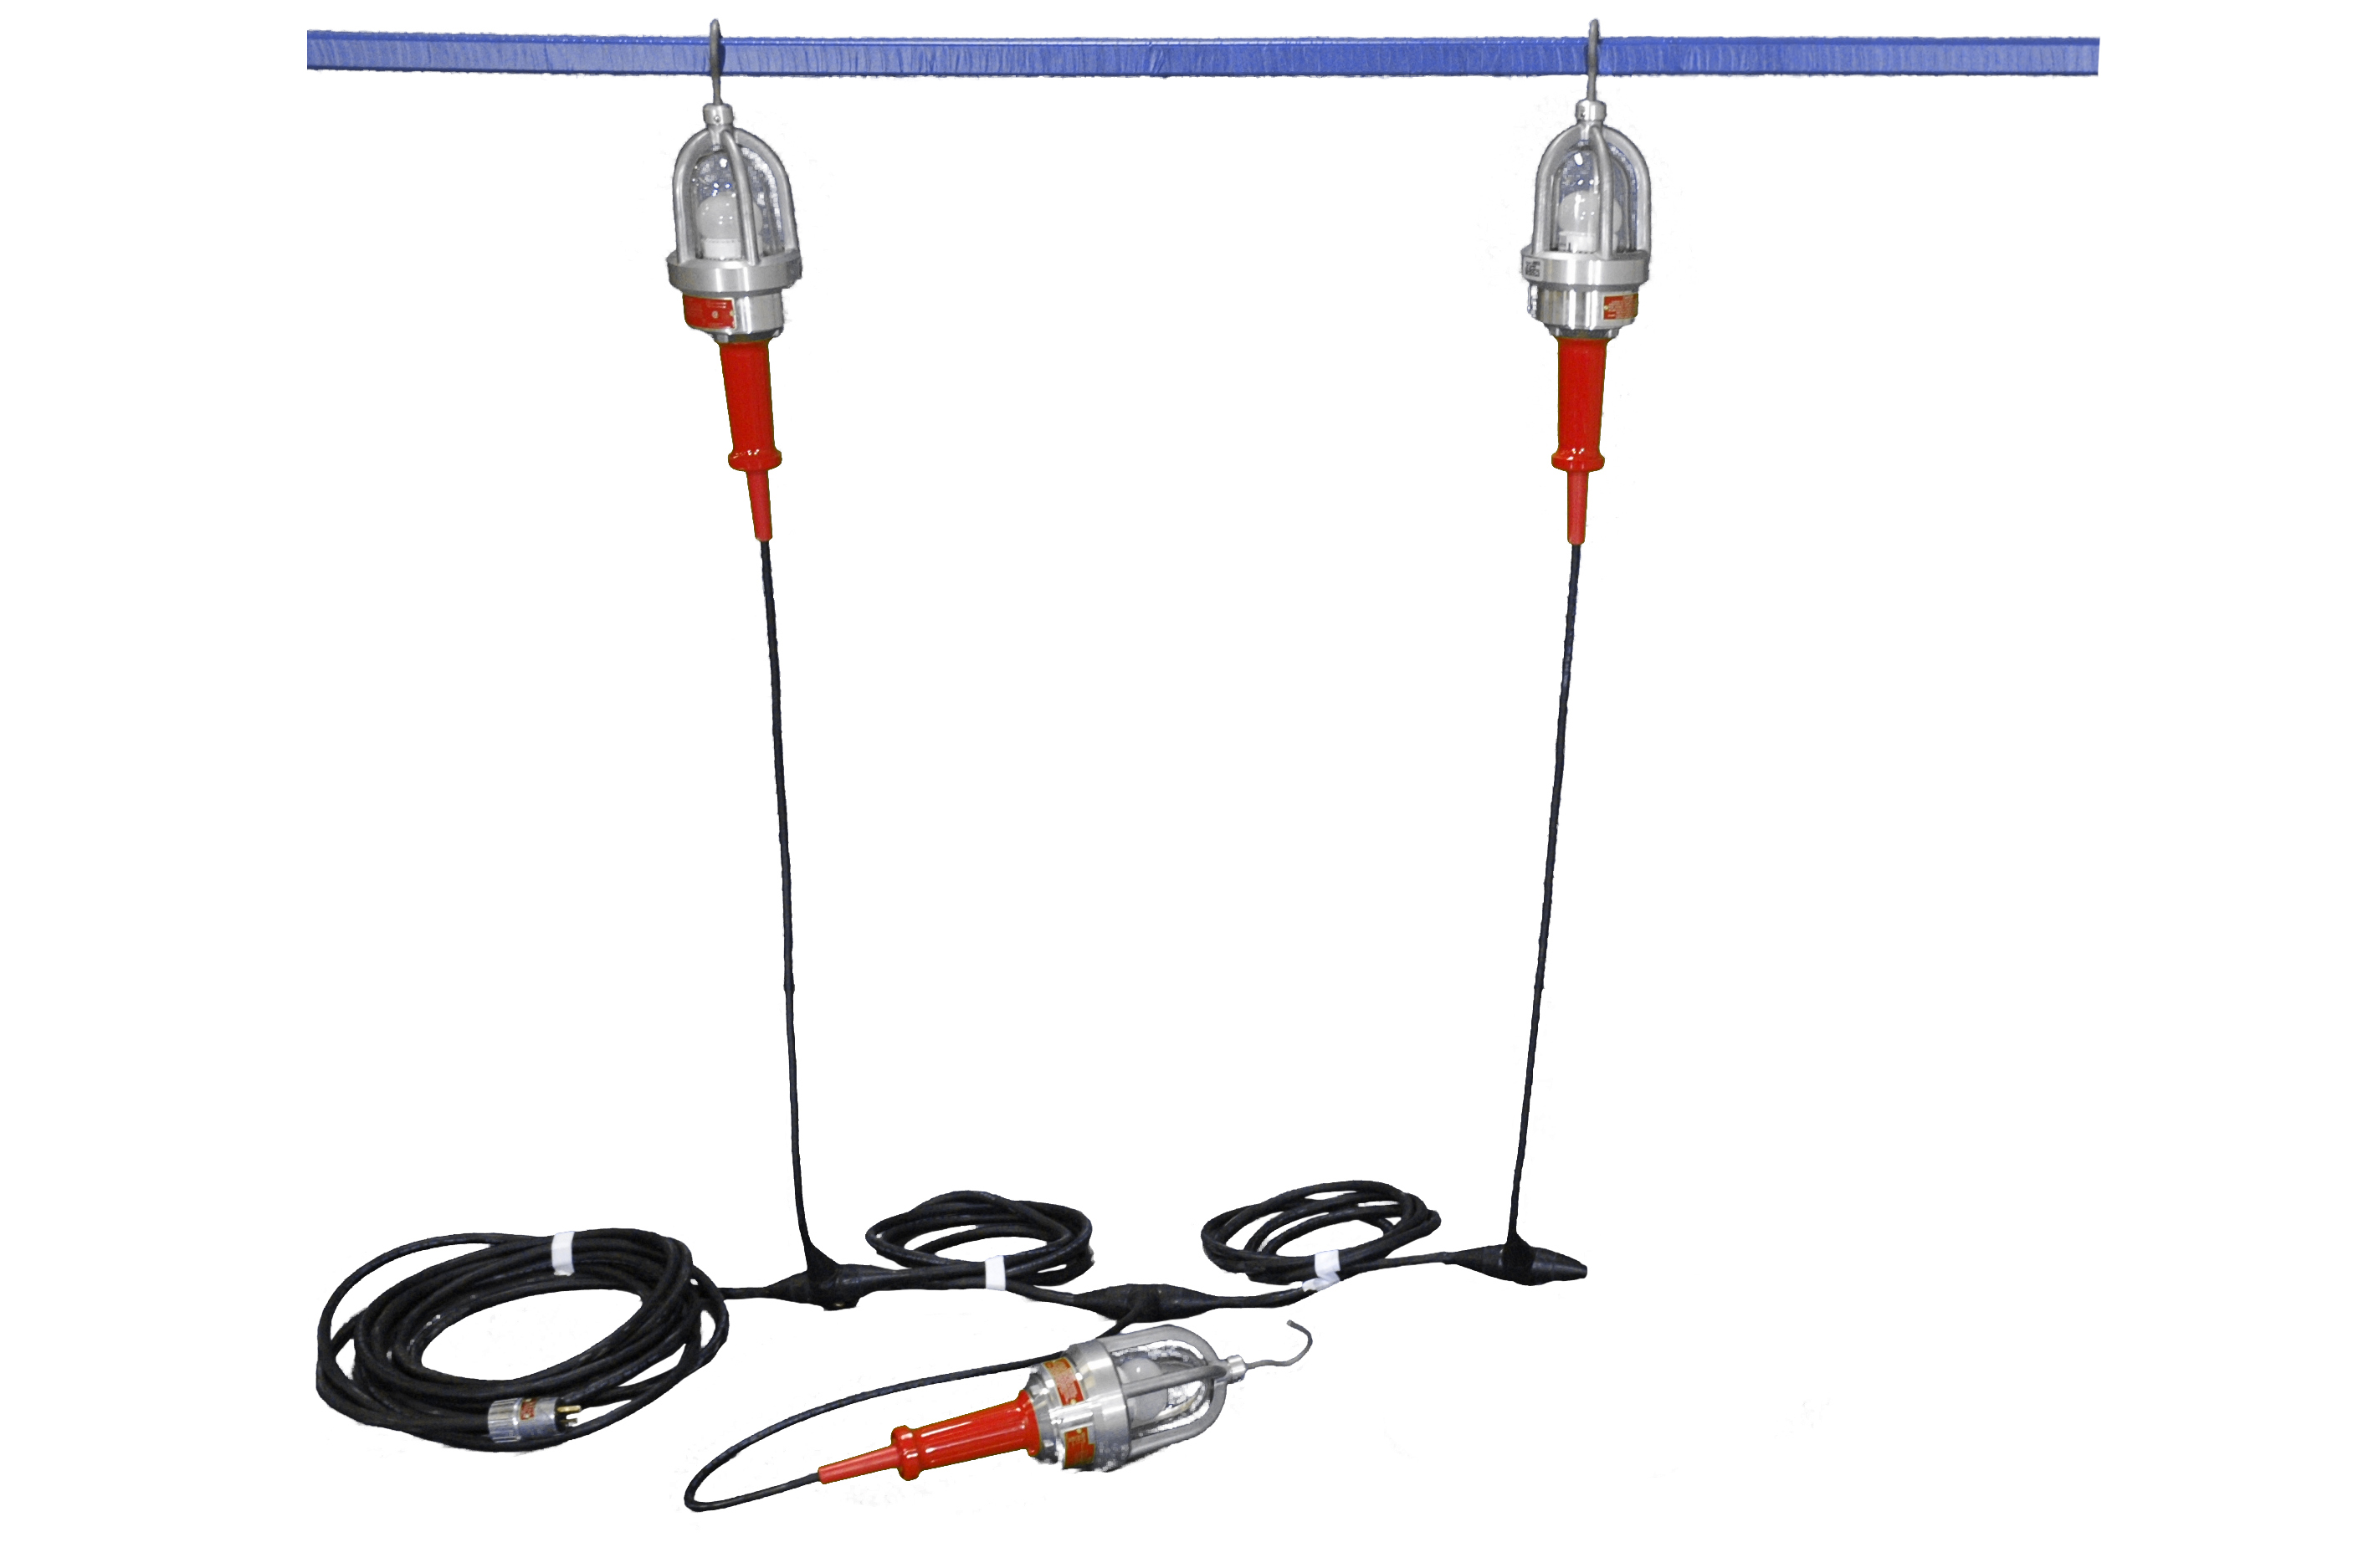 Class 1 Division 1 Explosion Proof LED String Lights